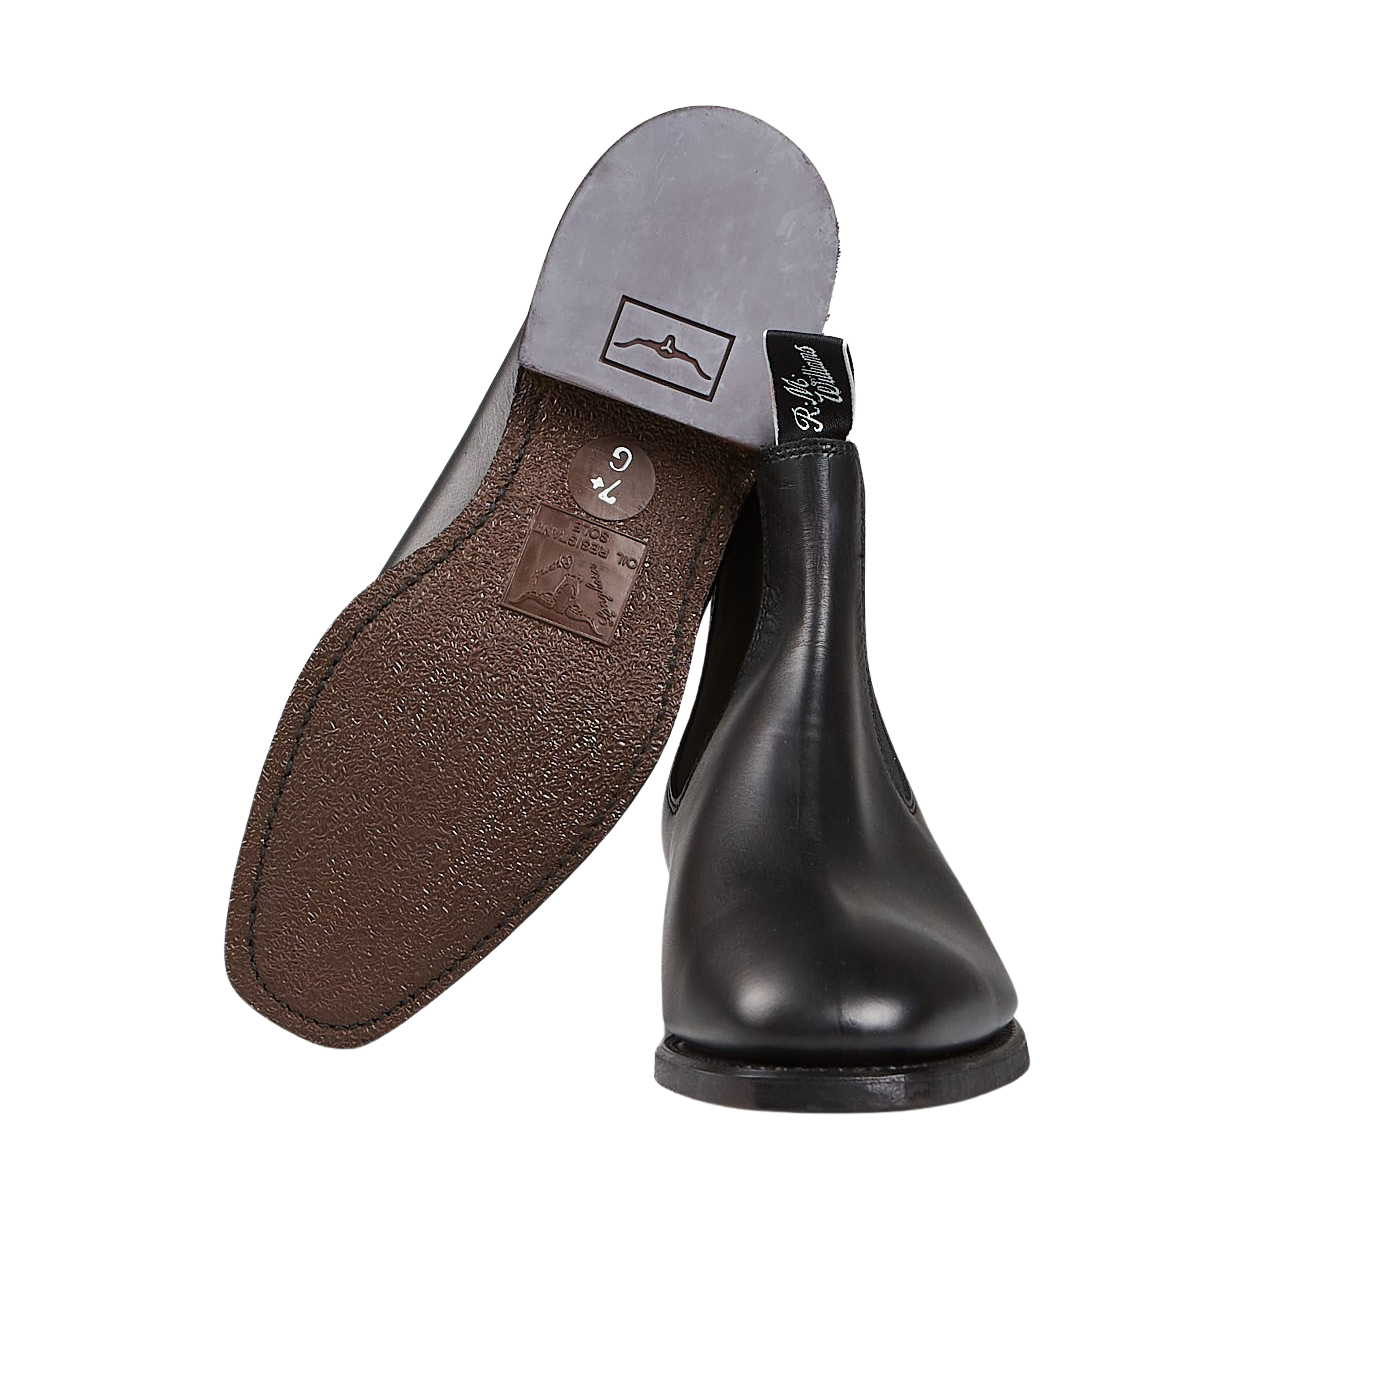 Shoe trees and shoe care of RM Williams